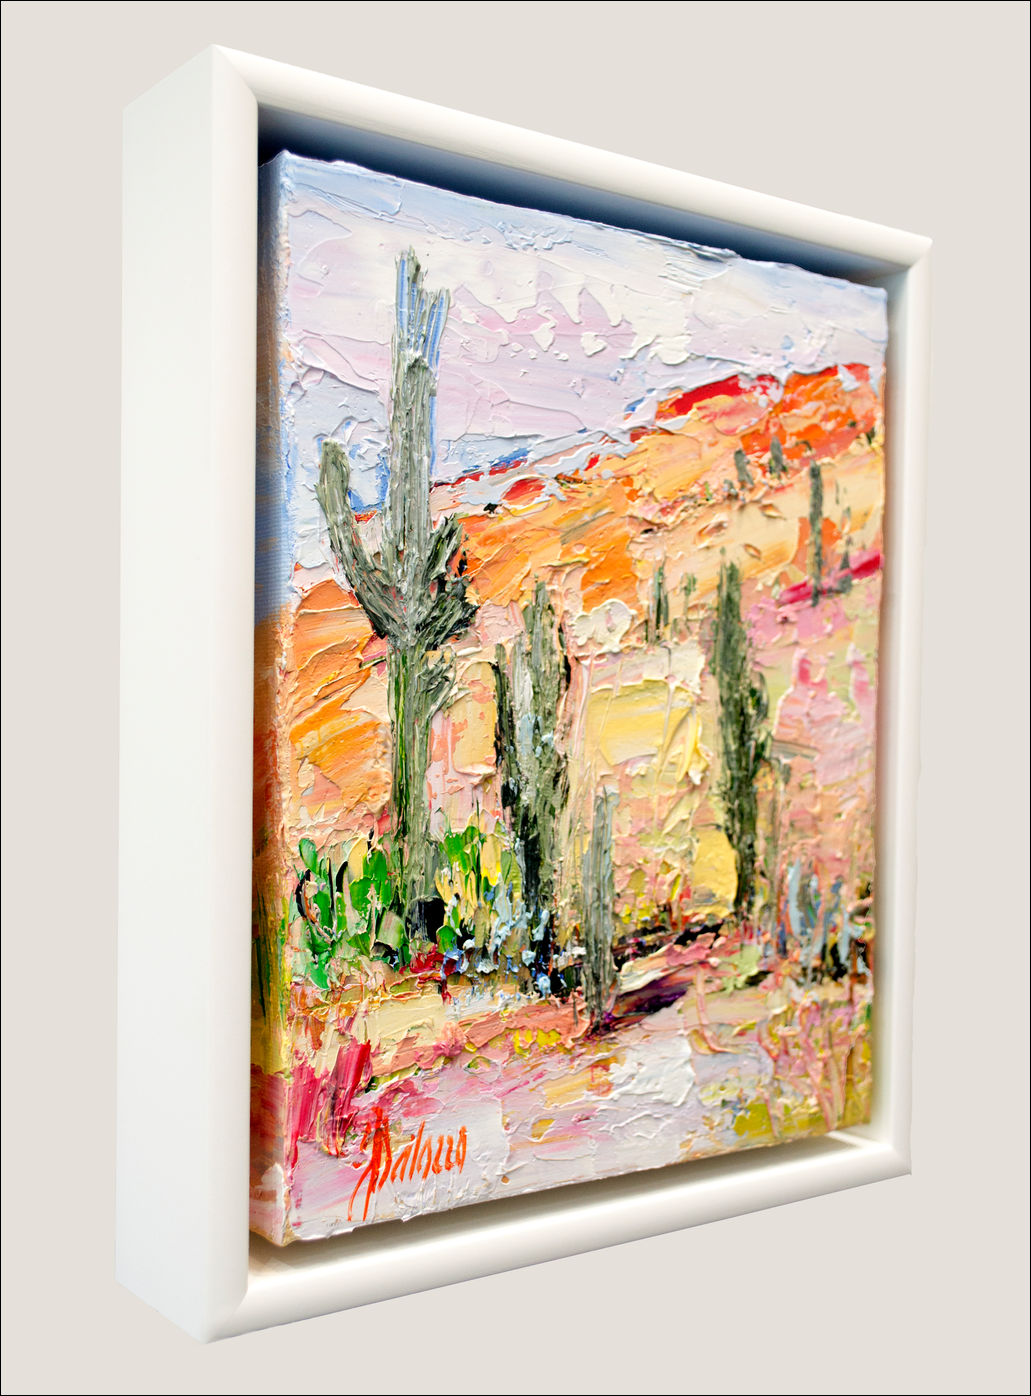 Framed Side View Of Landscape Painting "Desert Off Track Scottsdale Arizona 3" By Judith Dalozzo